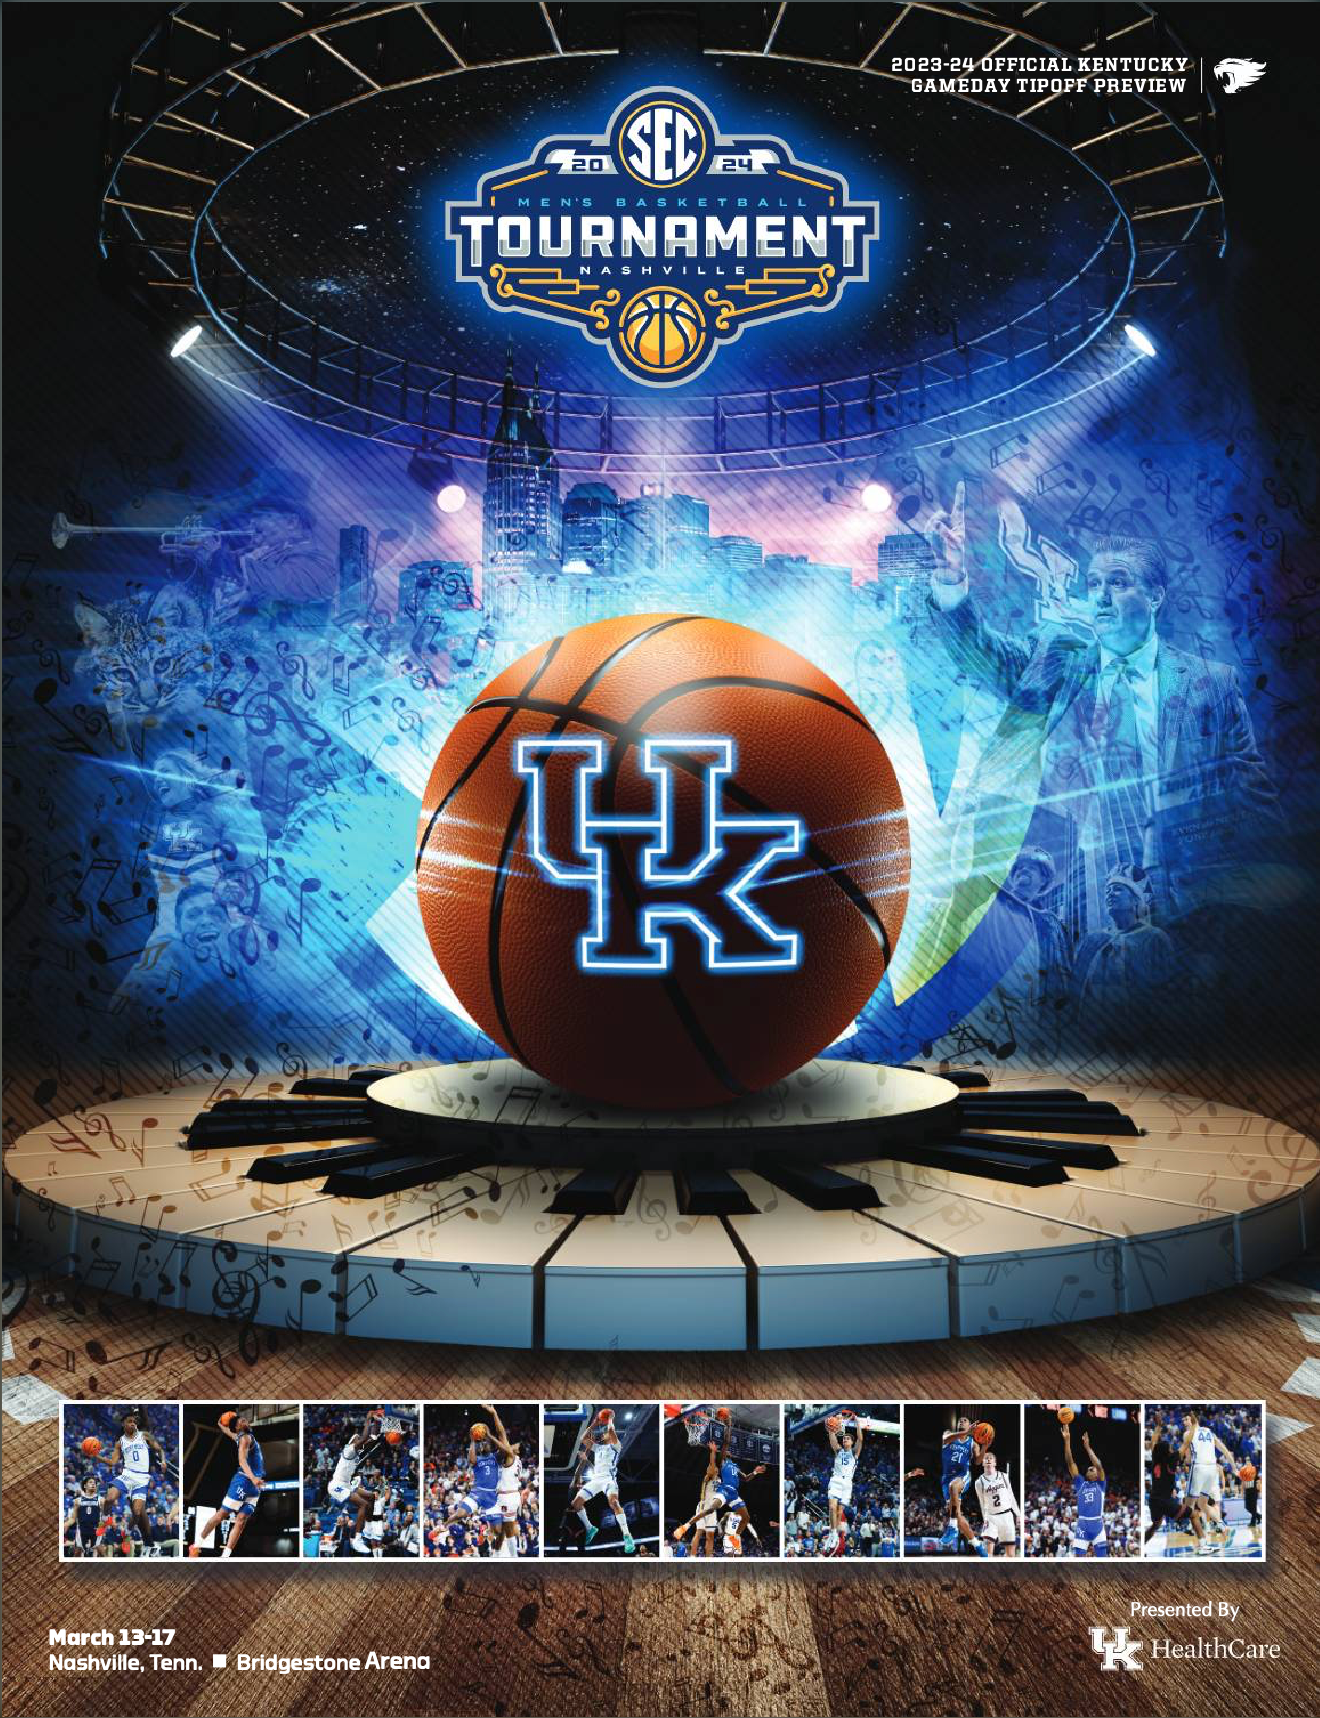 Listen and Watch UK Sports Network Radio Coverage of Kentucky Men's Basketball vs Texas A&M in the SEC Tournament